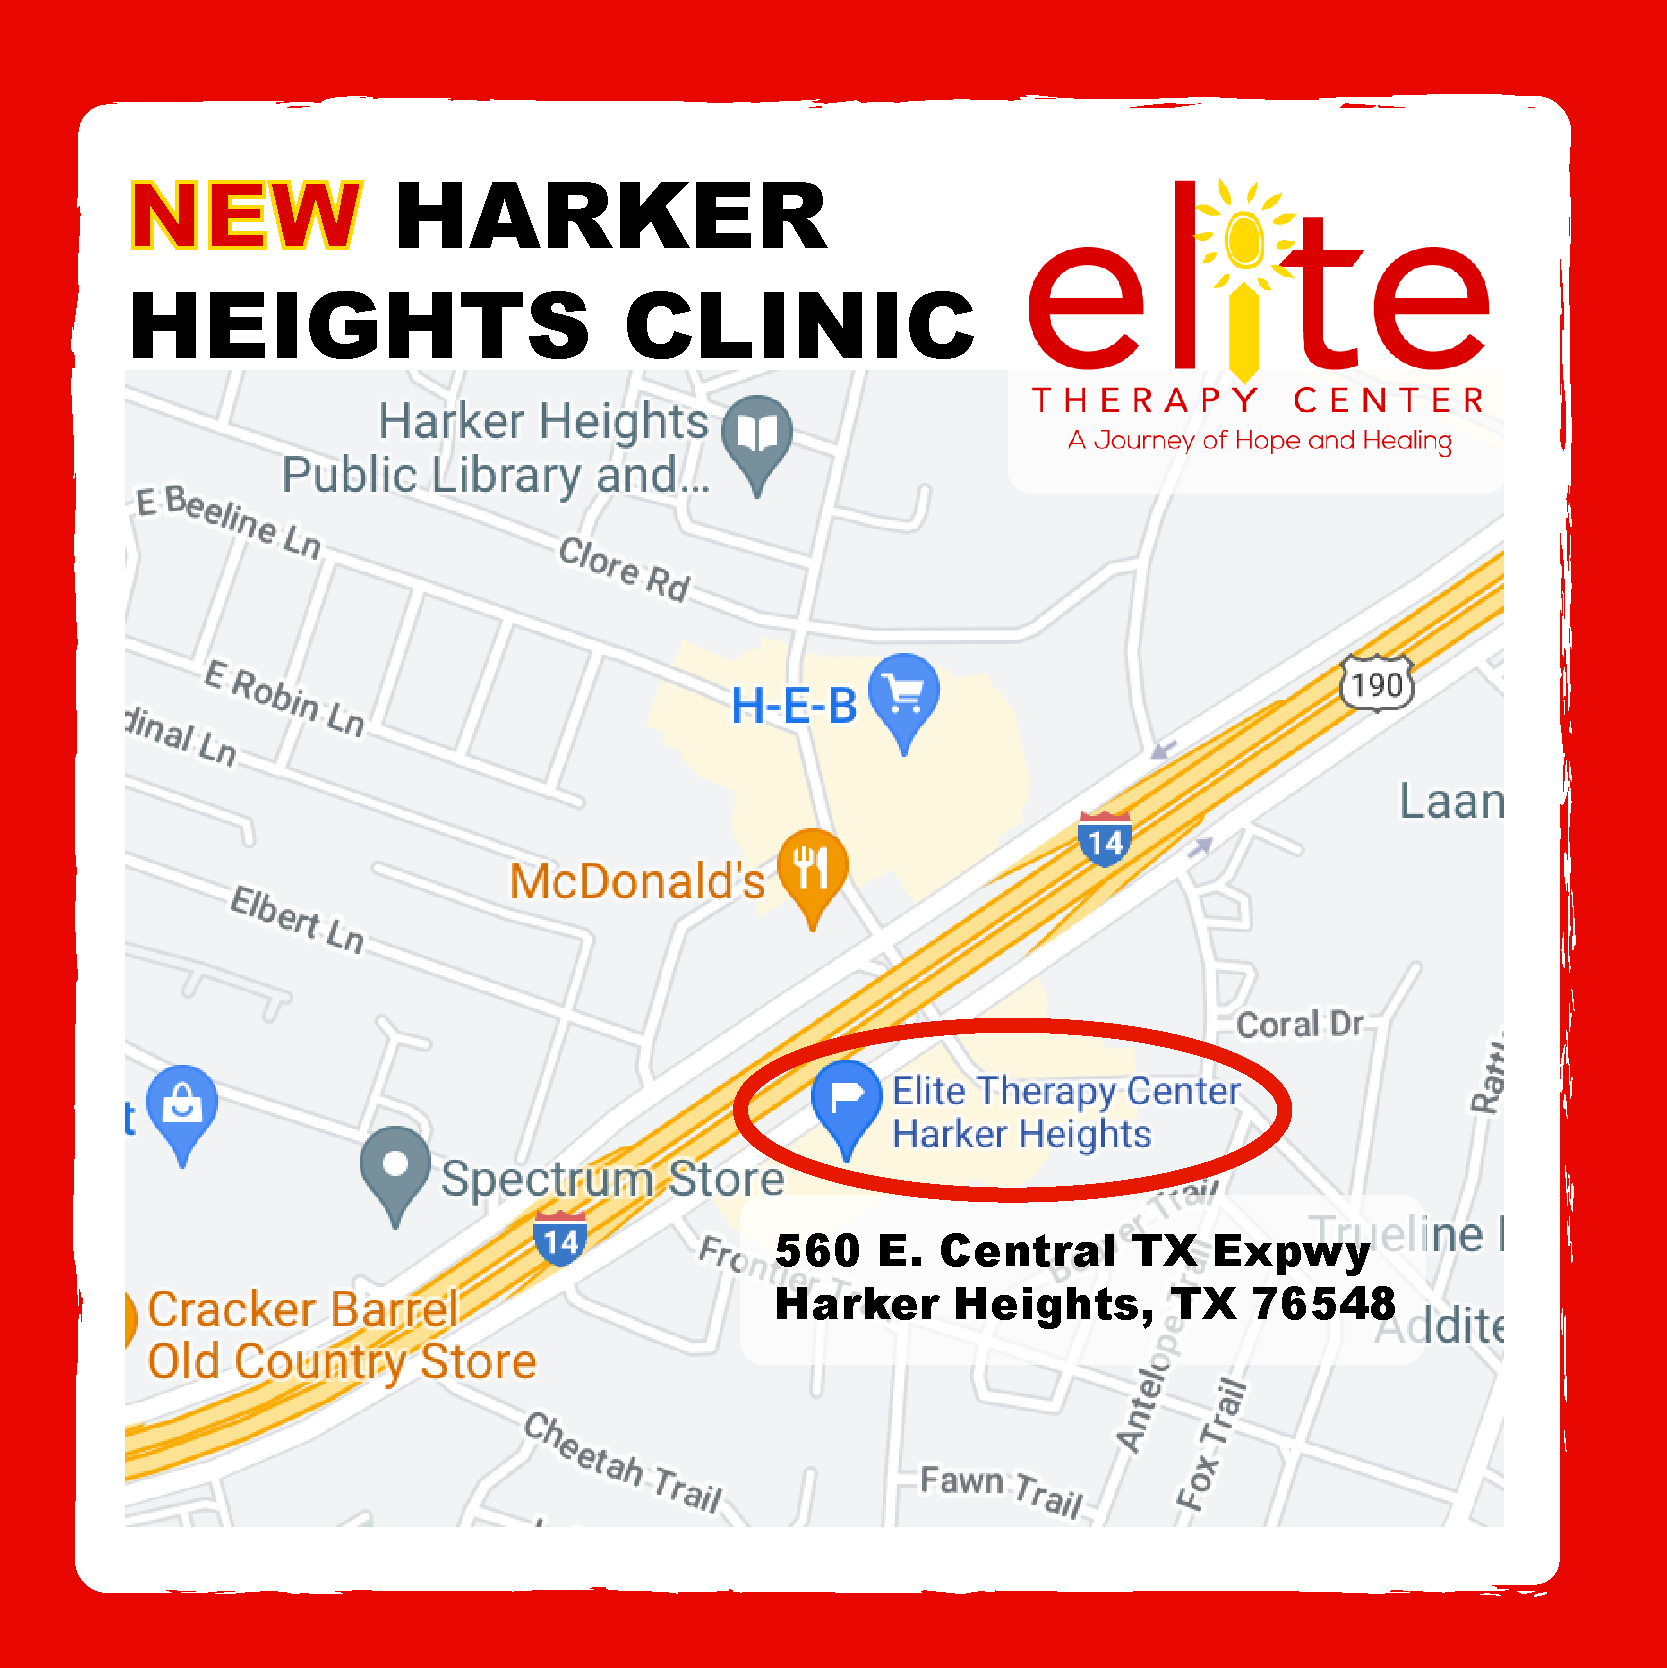 Elite Therapy Center Harker Heights Clinic